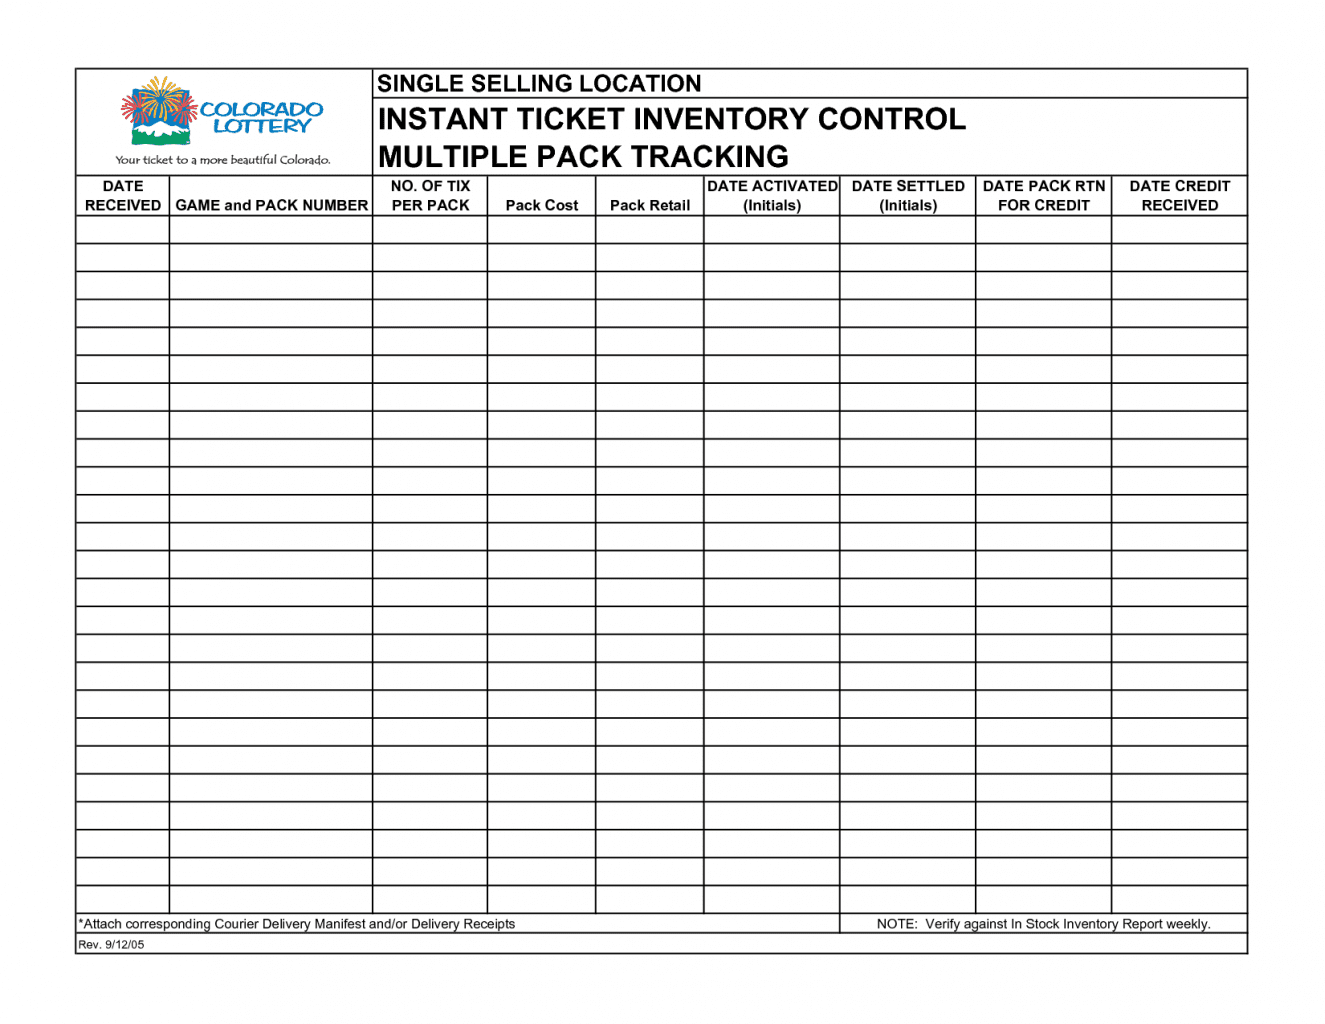 msds inventory sheet template